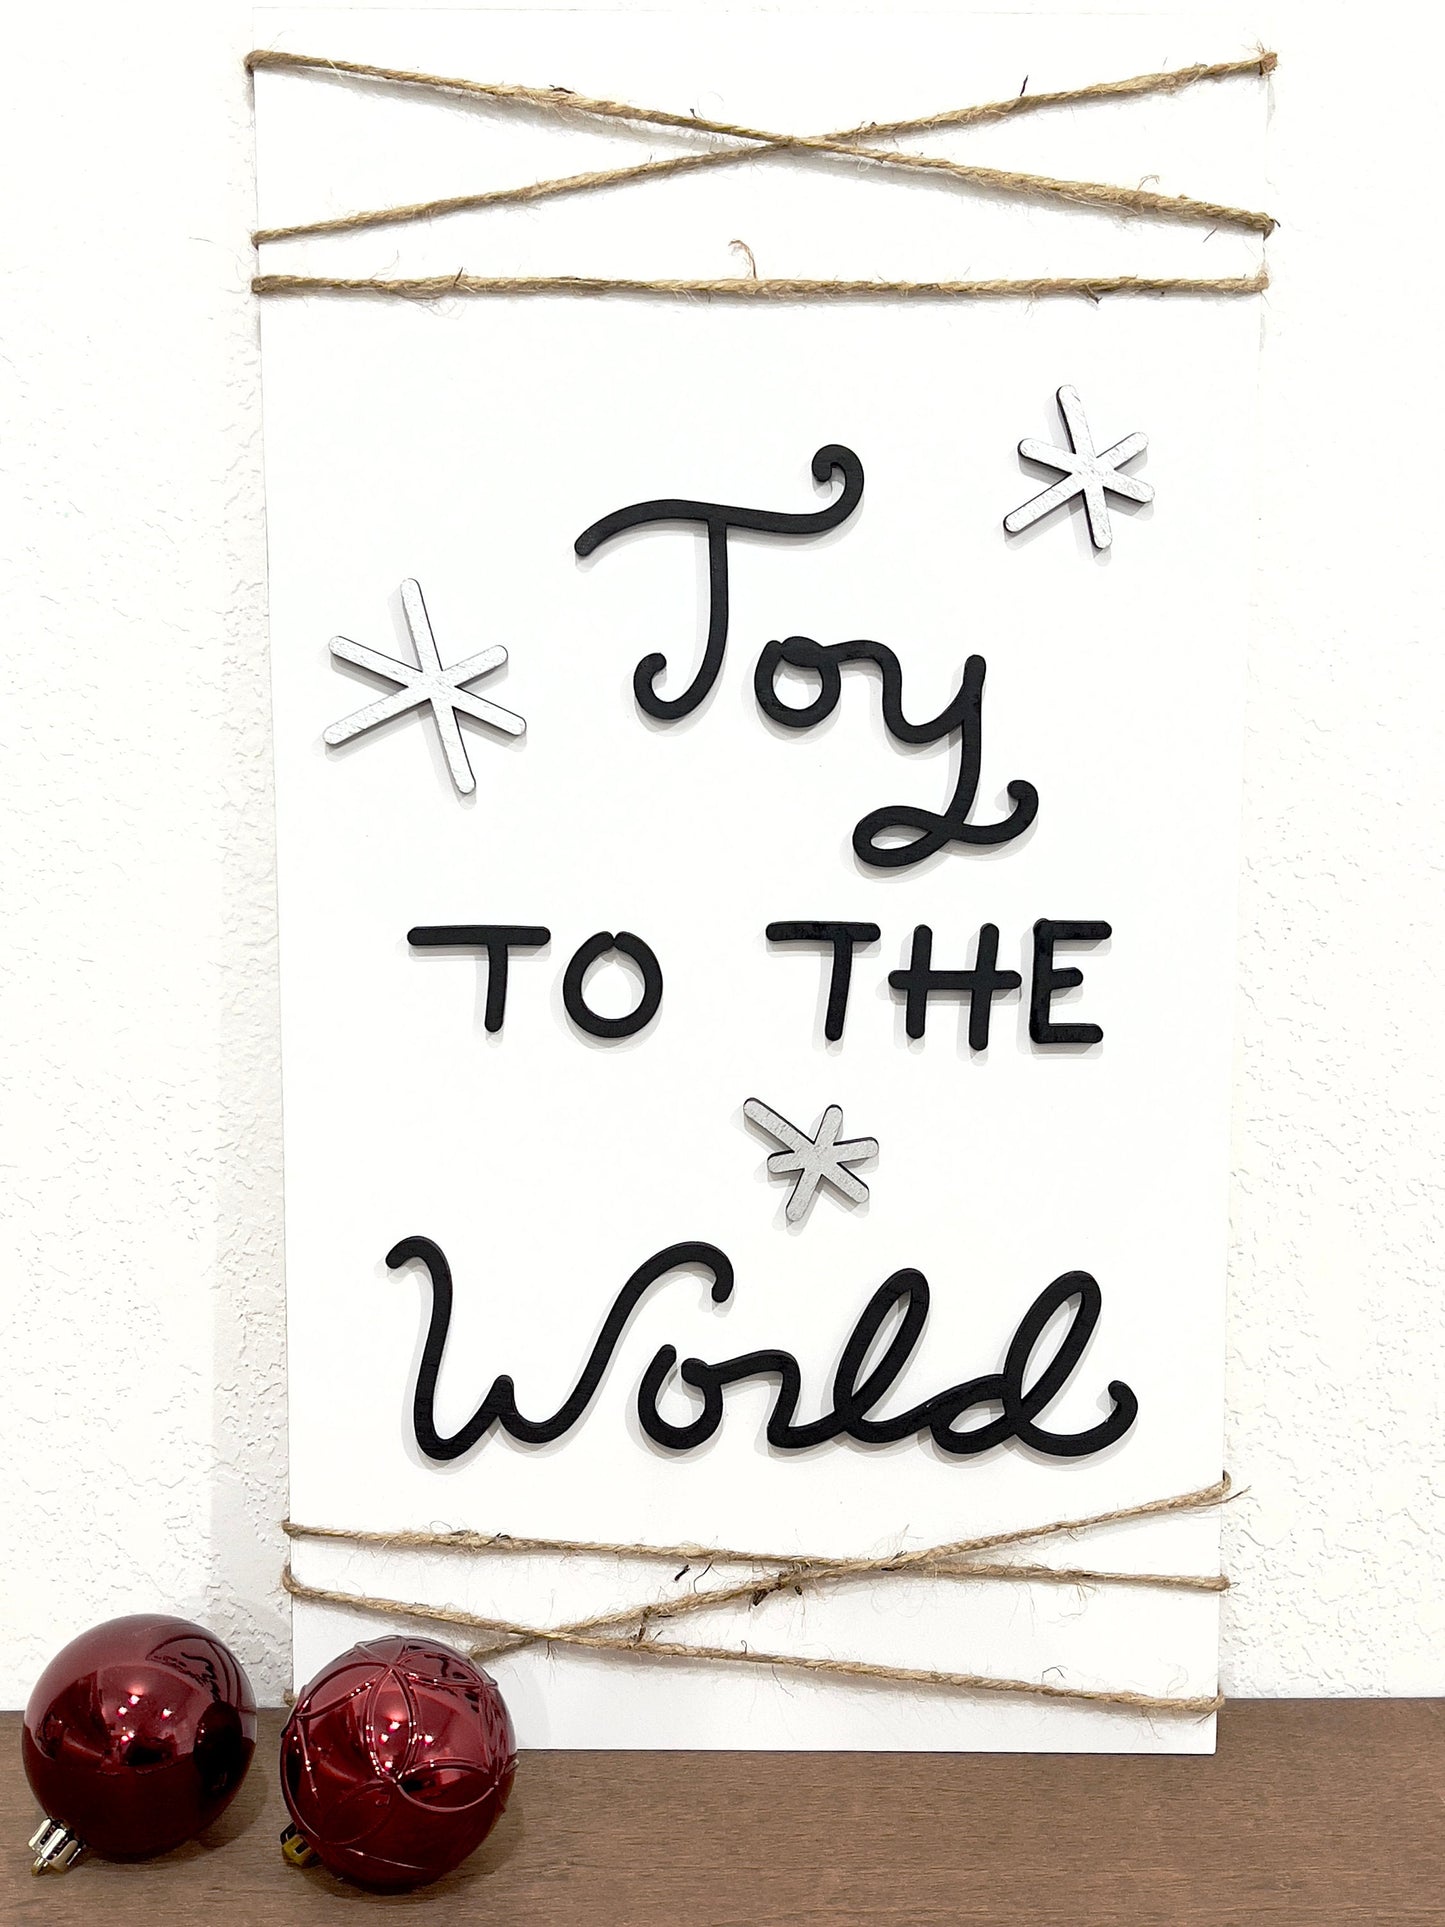 Joy to the world sign kit, DIY holiday crafts, winter sign making supplies, evergreen trees kid craft project ideas, paint party sign bundle